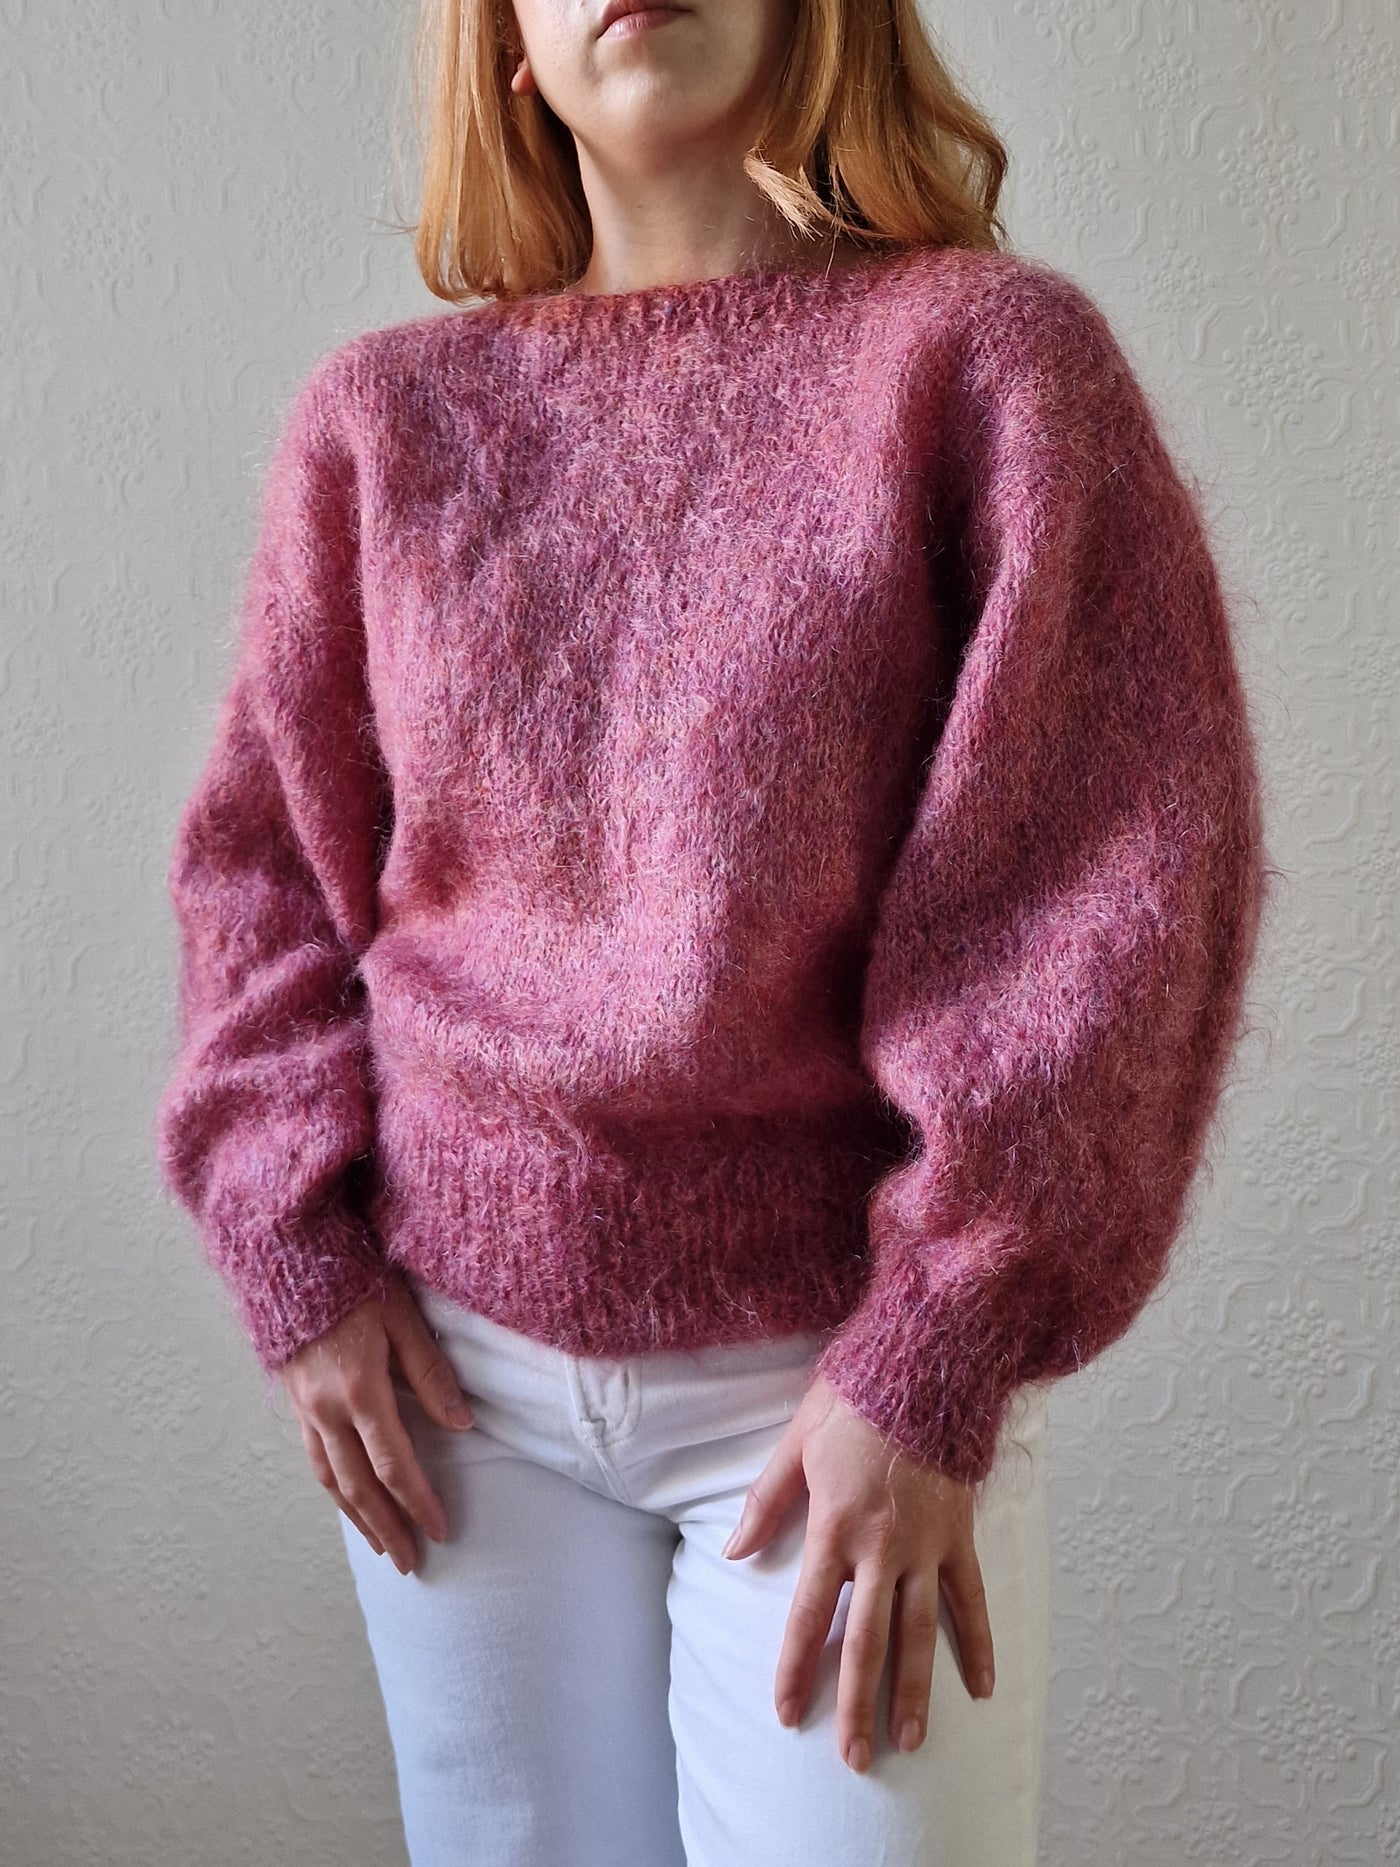 Vintage 80s Handknitted Dark Pink Mohair Jumper with Batwing Sleeves - M/L